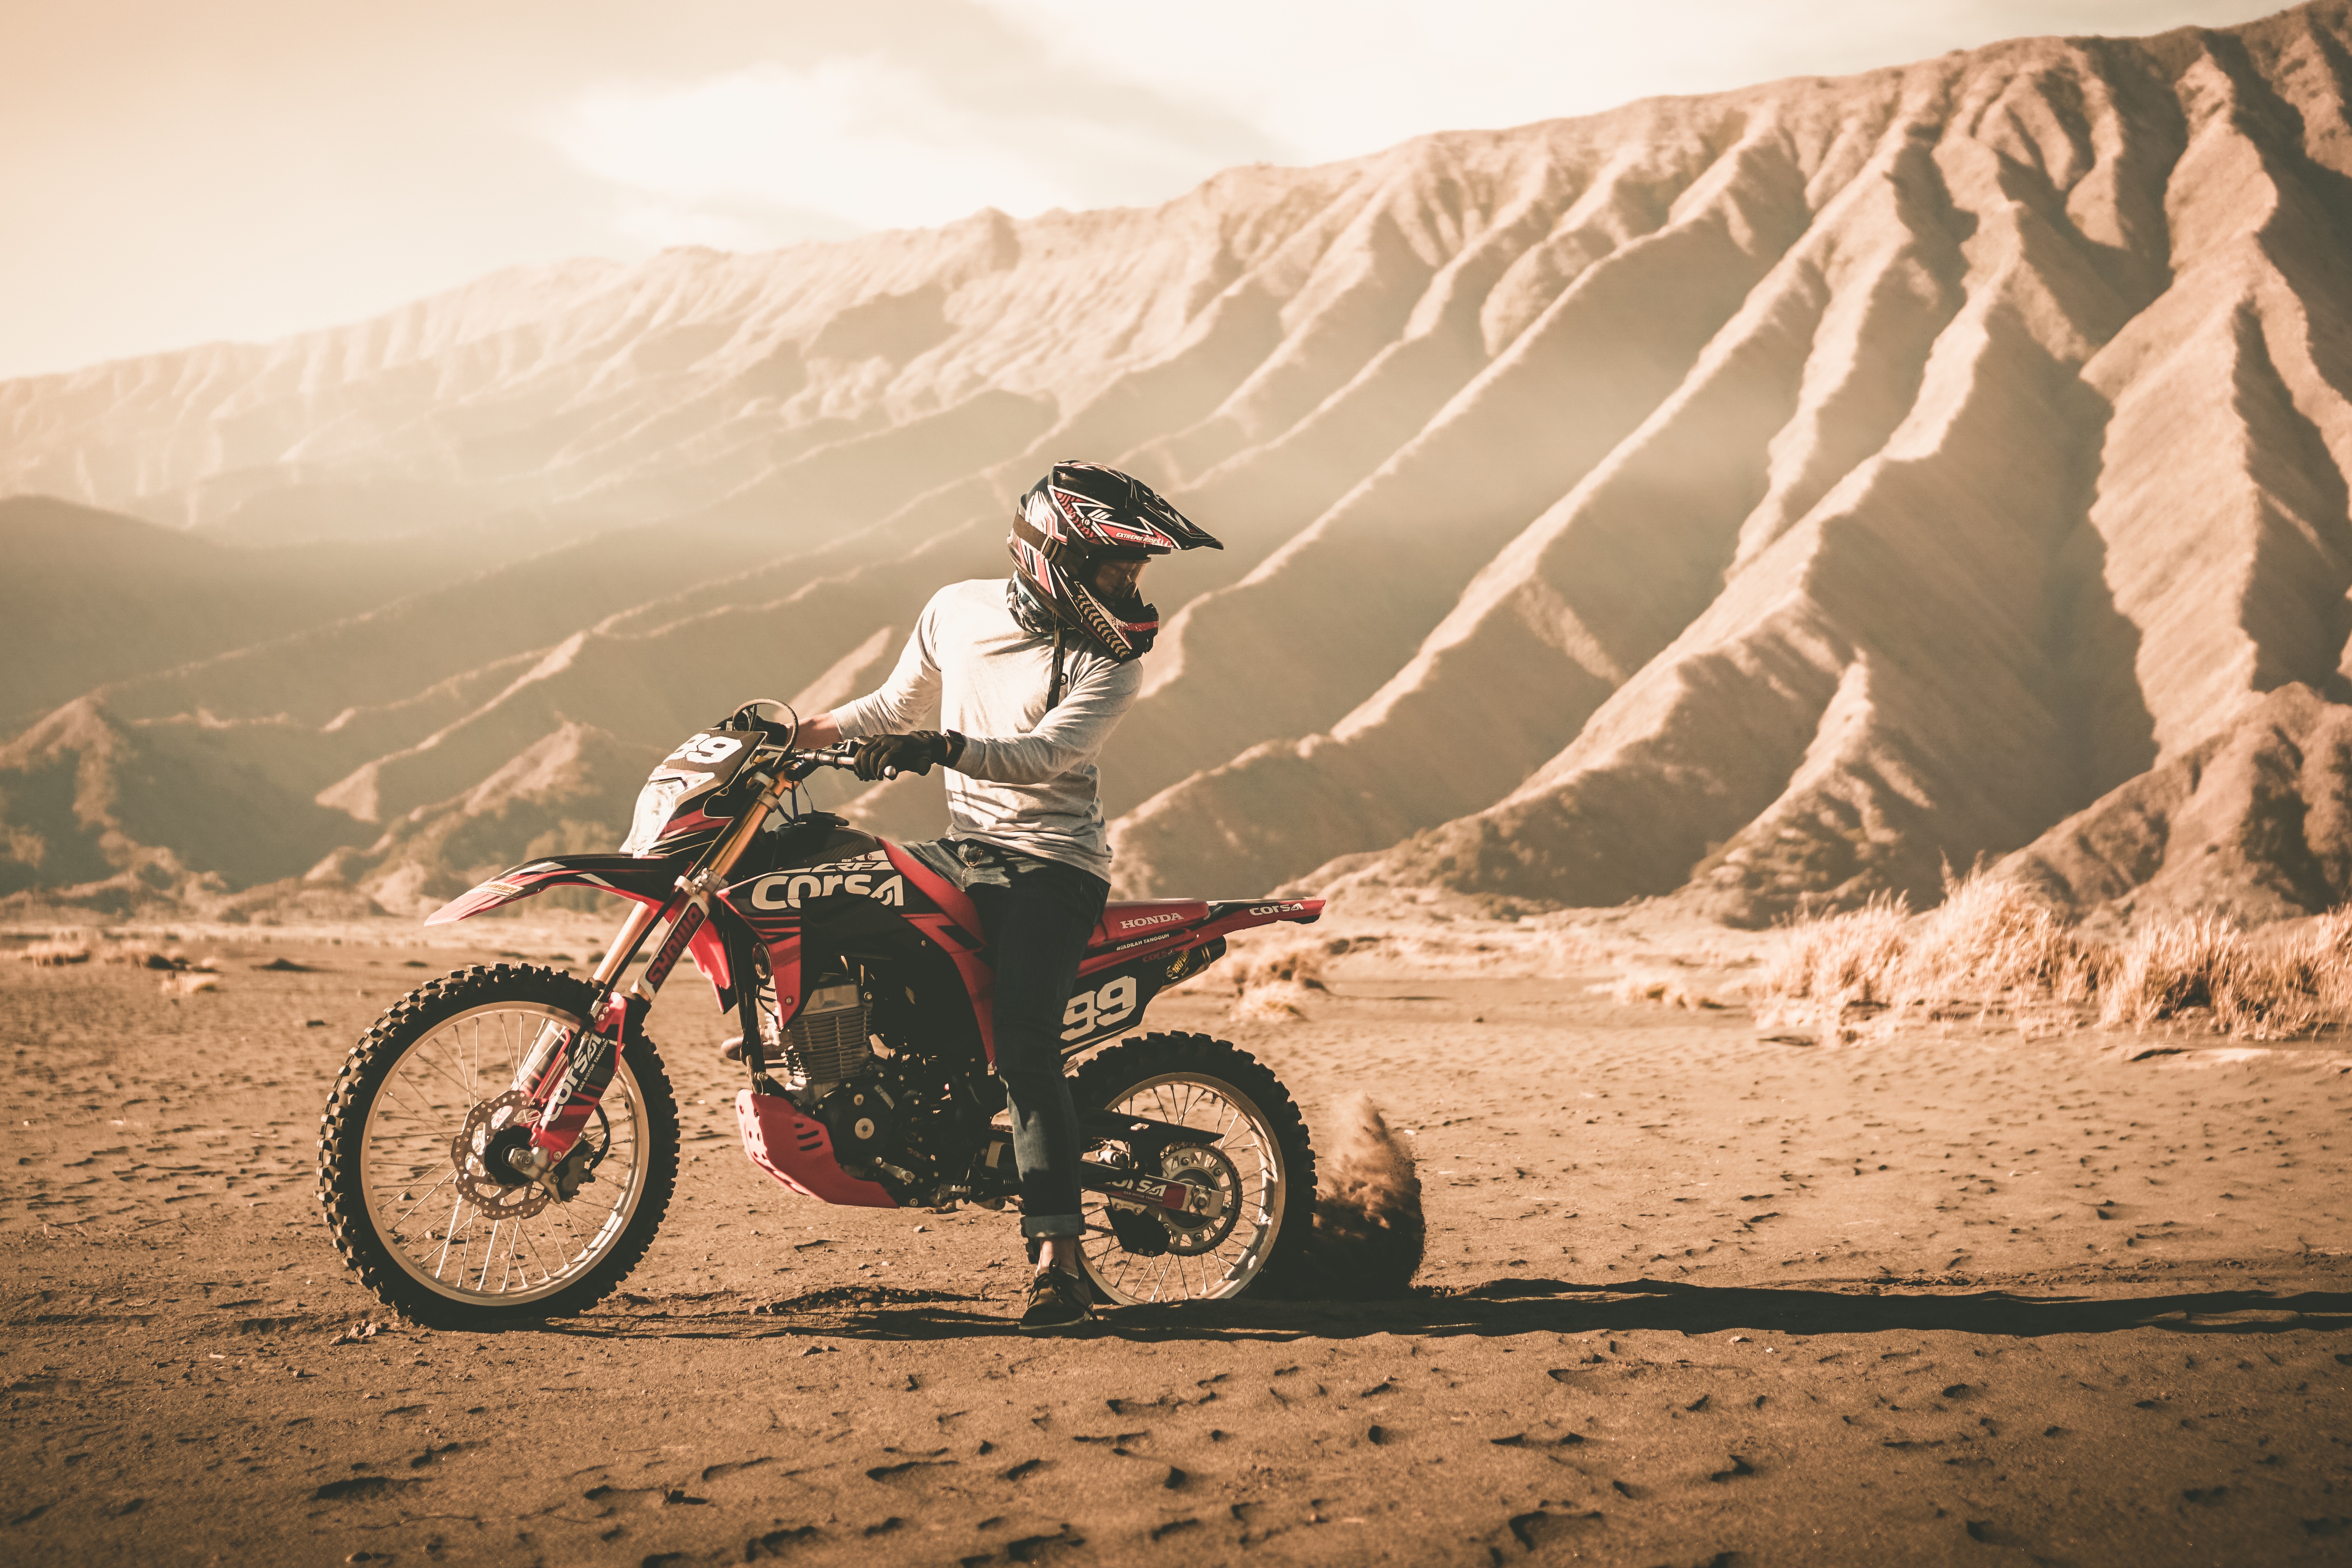 motorcyclist, cross, mountains, sand, motorcycles, helmet, motorcycle, off road, impassability phone wallpaper